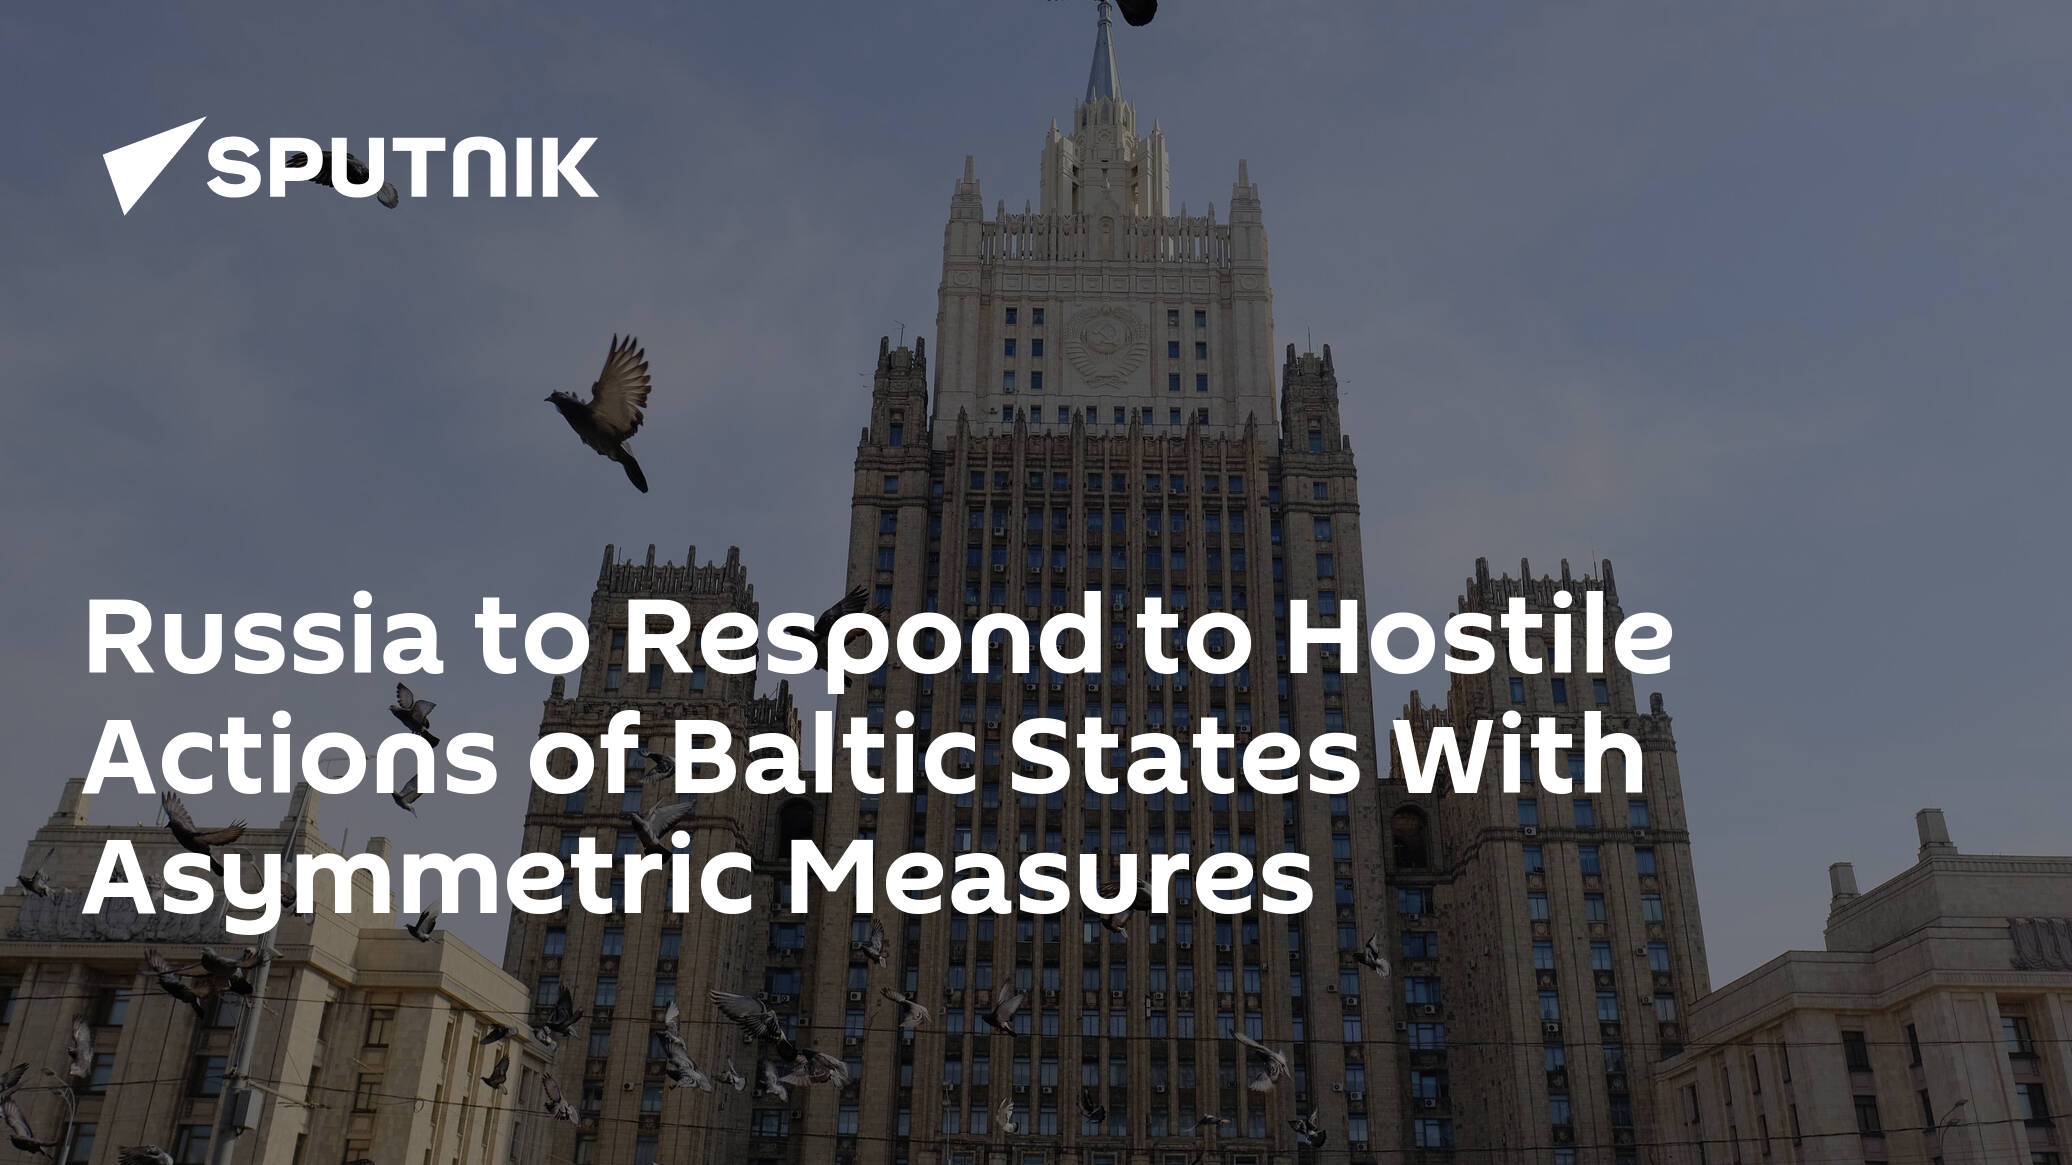 Russia to Respond to Hostile Actions of Baltic States With Asymmetric Measures